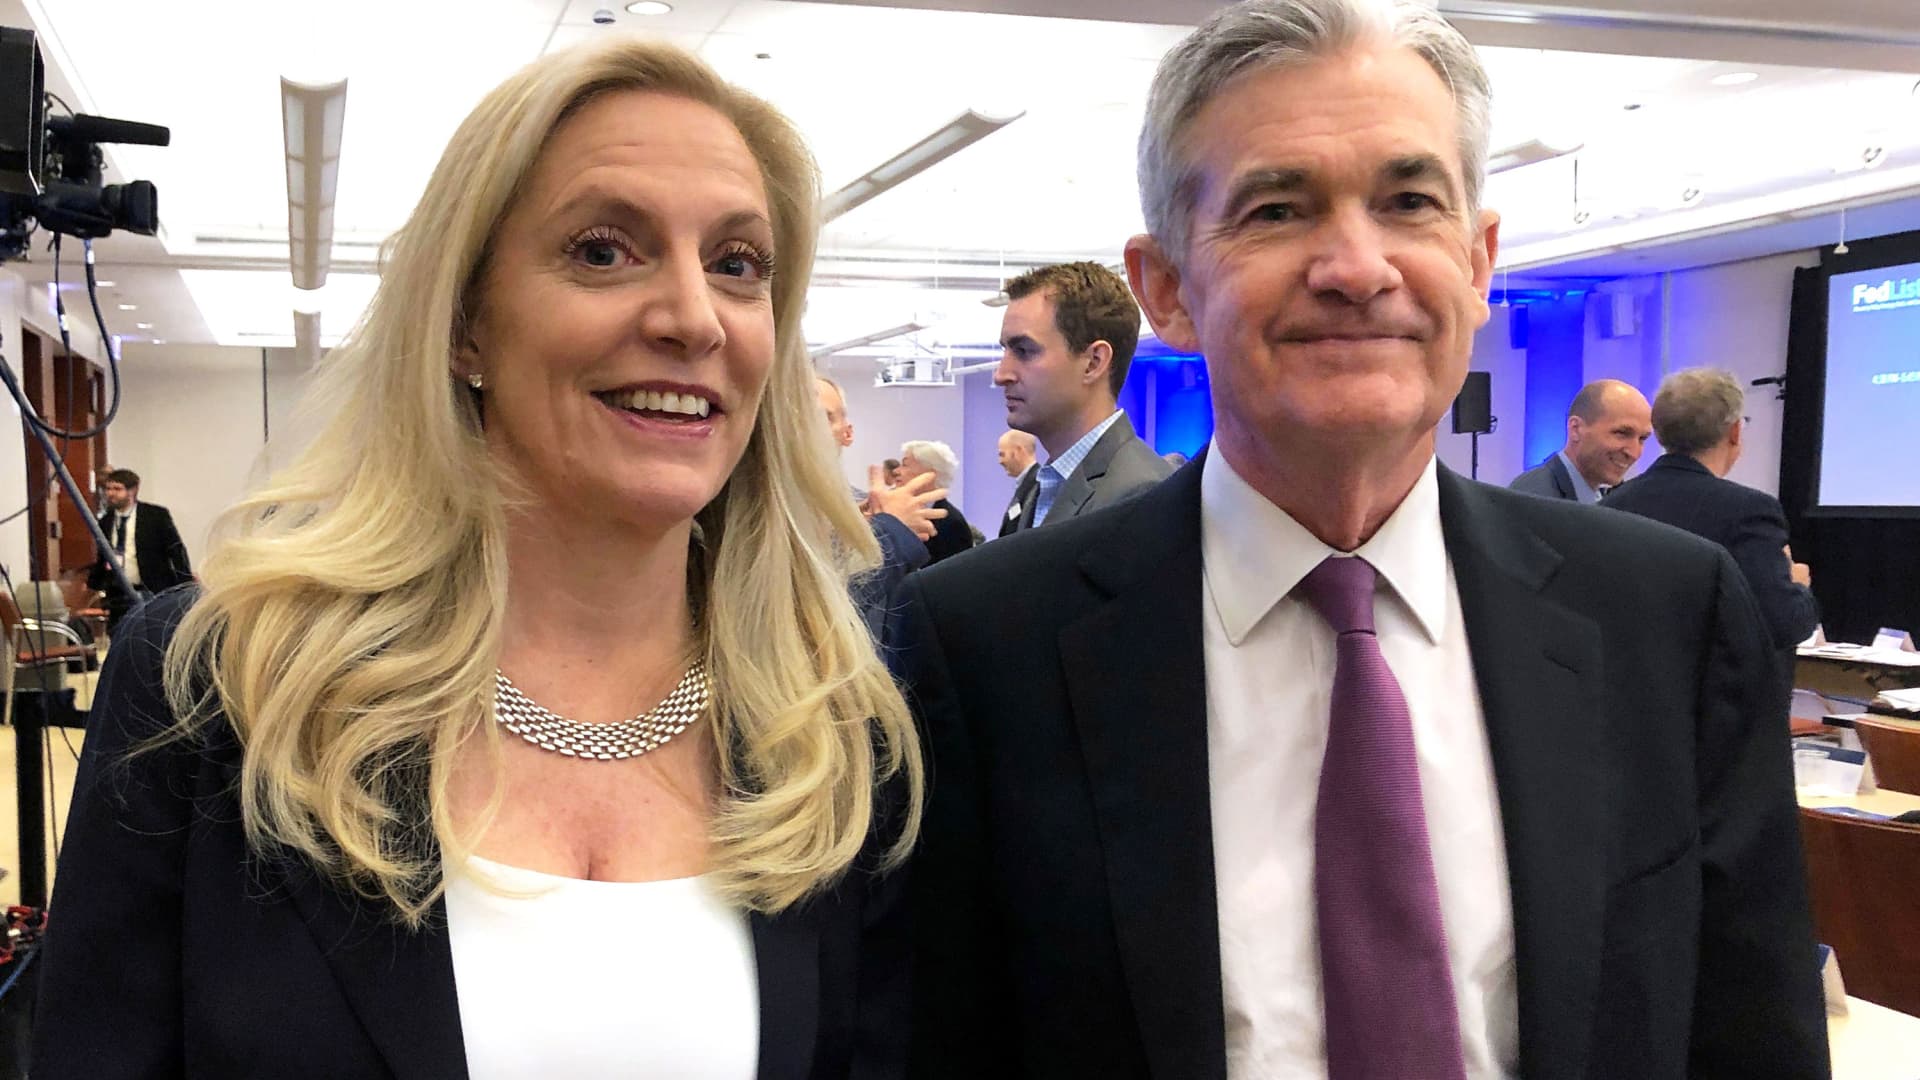 Federal Reserve Chairman Jerome Powell poses for photos with Fed Governor Lael Brainard (L) at the Federal Reserve Bank of Chicago, in Chicago, Illinois, U.S., June 4, 2019.